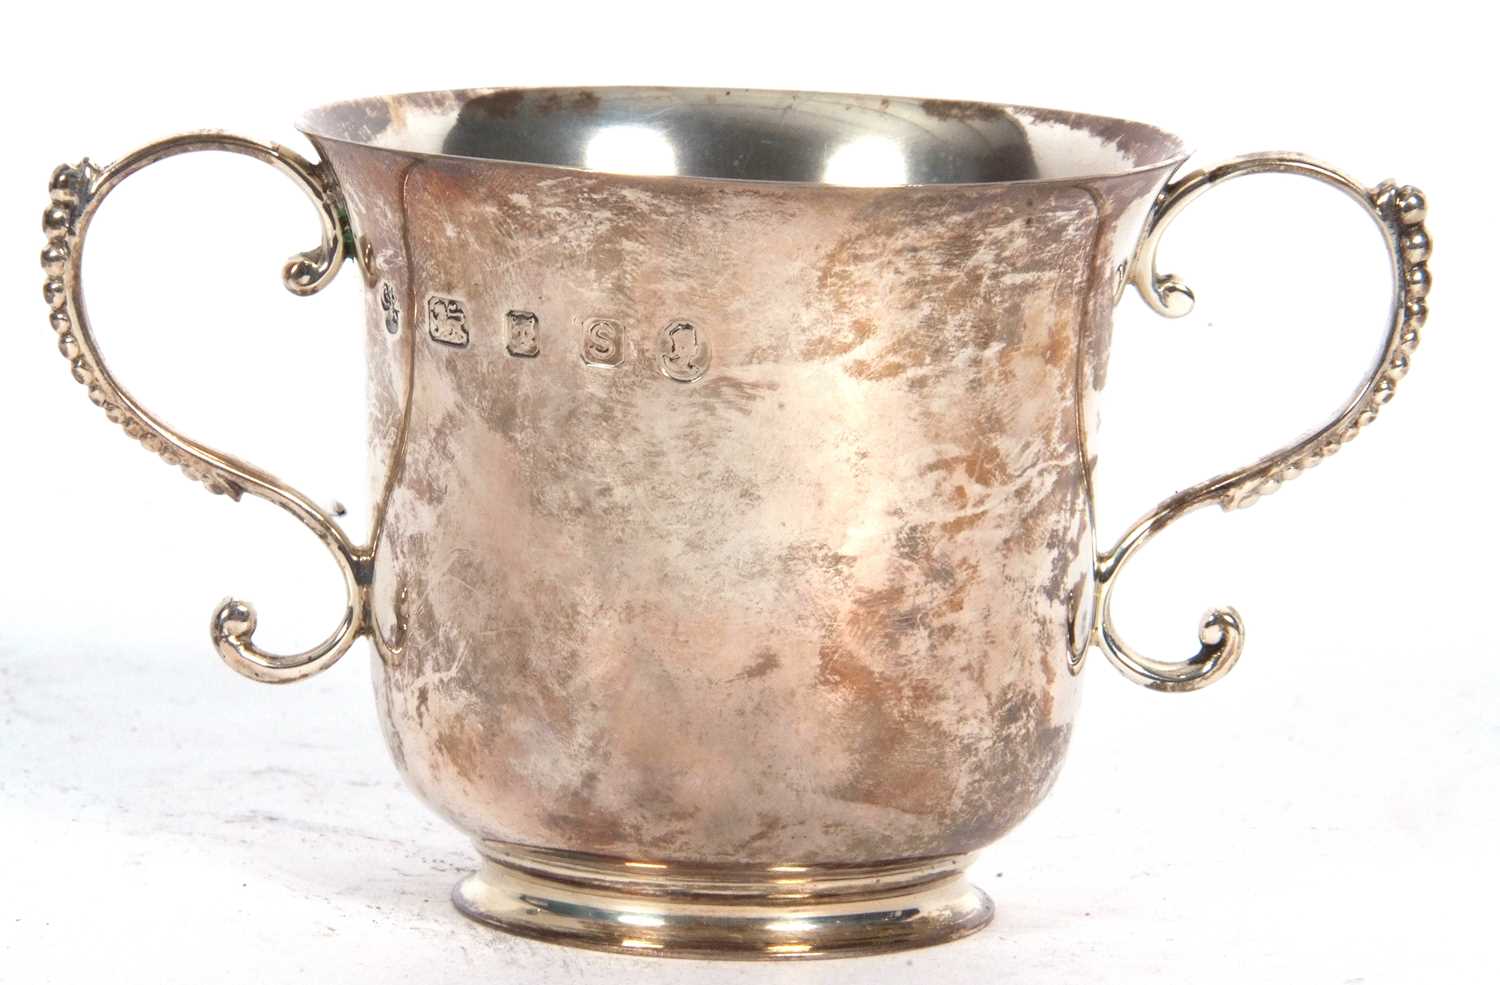 Small Elizabeth 11 porringer of typical form having beaded scrolled handles and engraved with a - Image 3 of 7